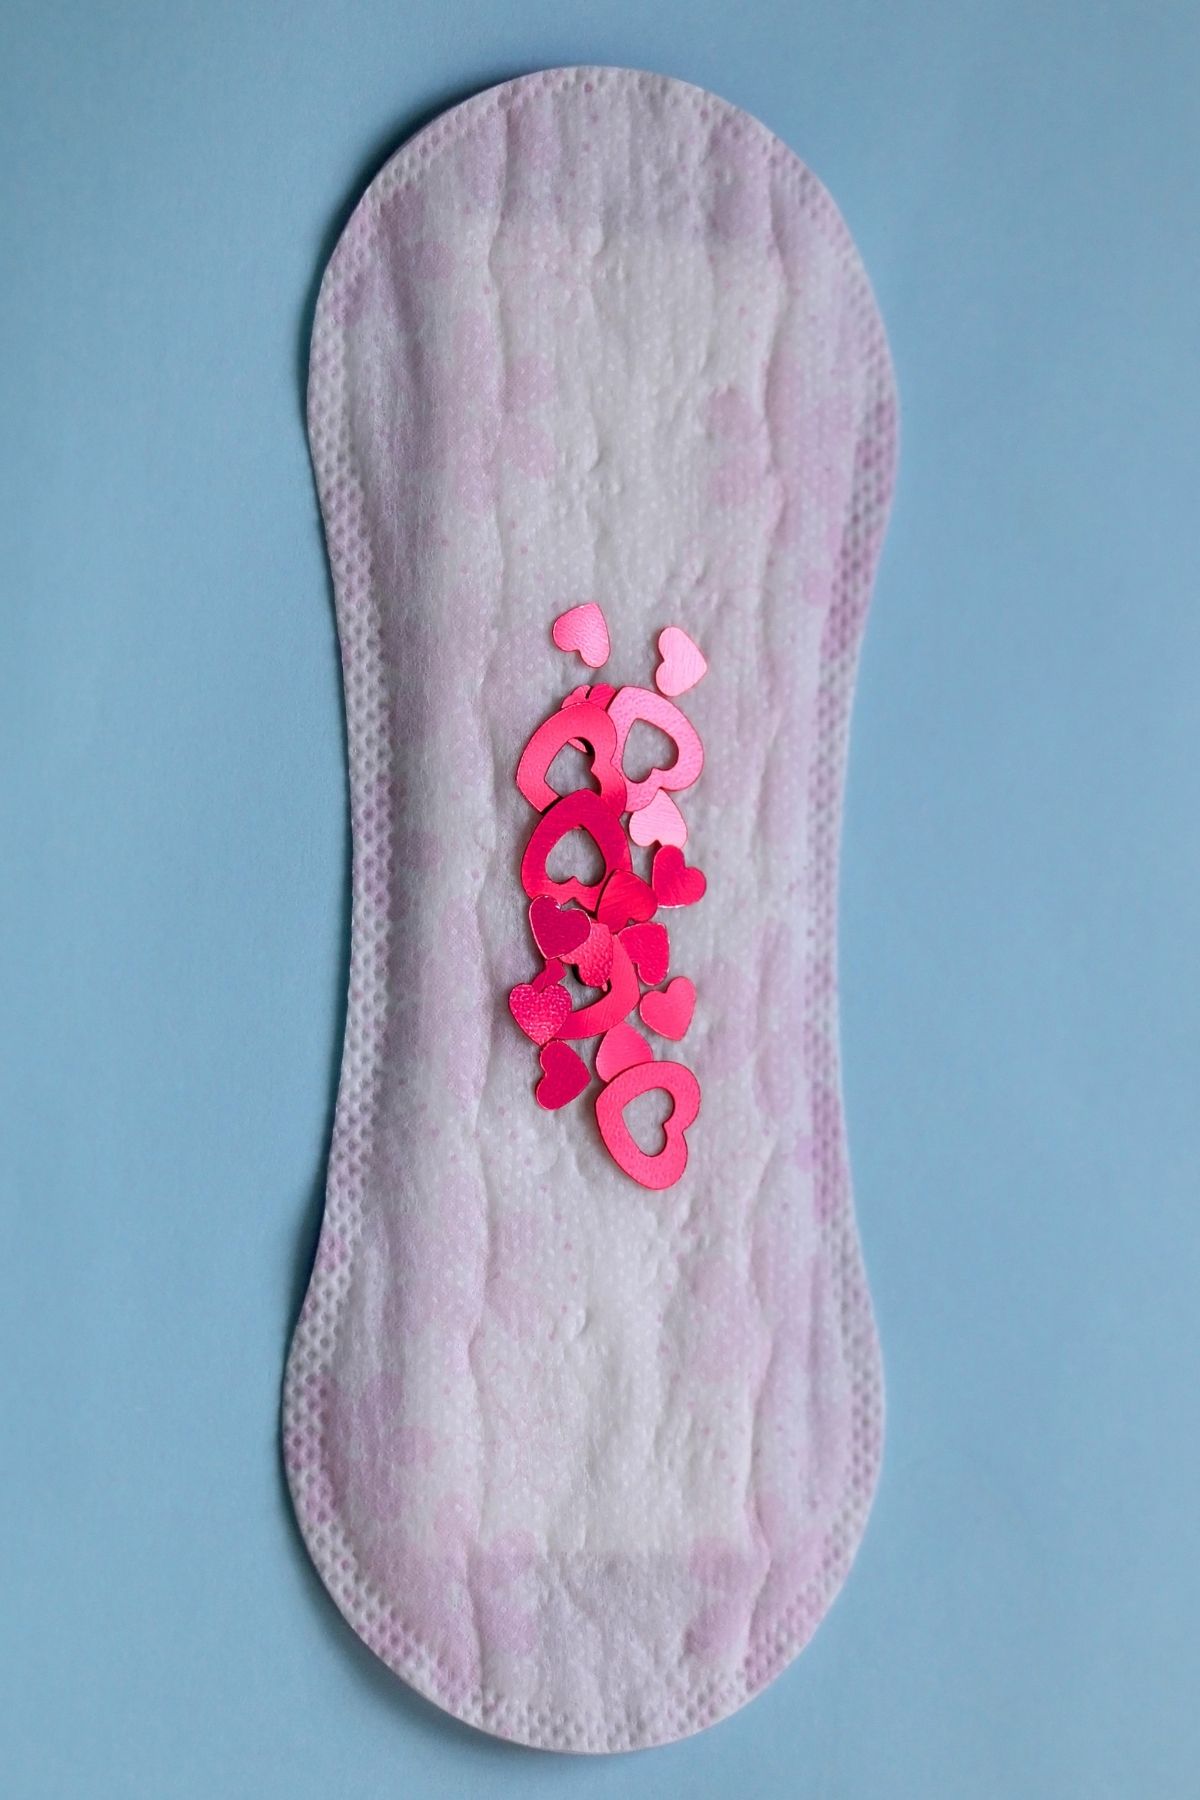 Small sanitary pad on blue background; pad has red confetti down middle to represent blood.